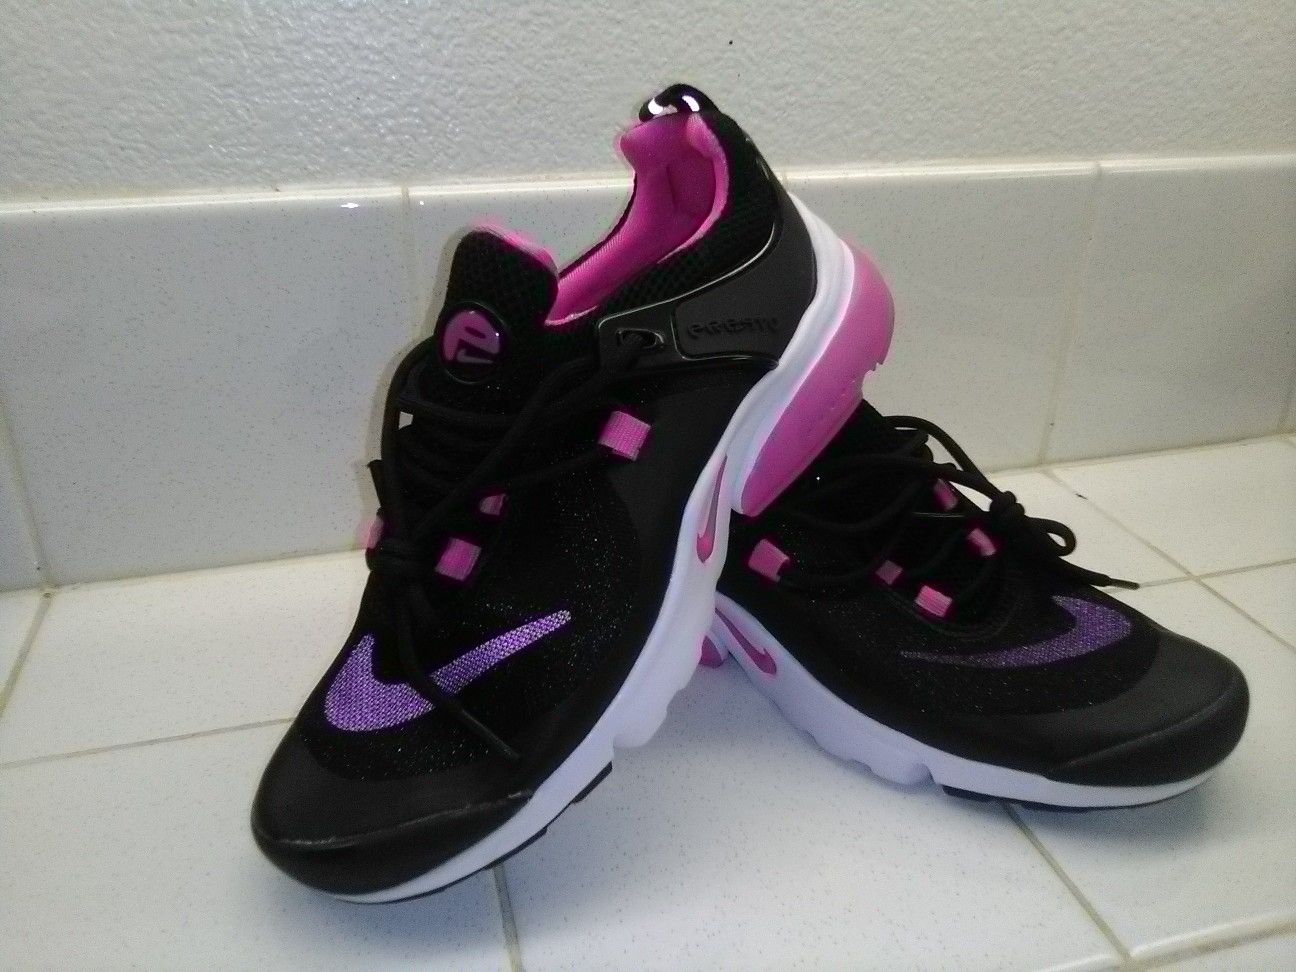 Black & pink Nike shoes (never used) # 7 woman